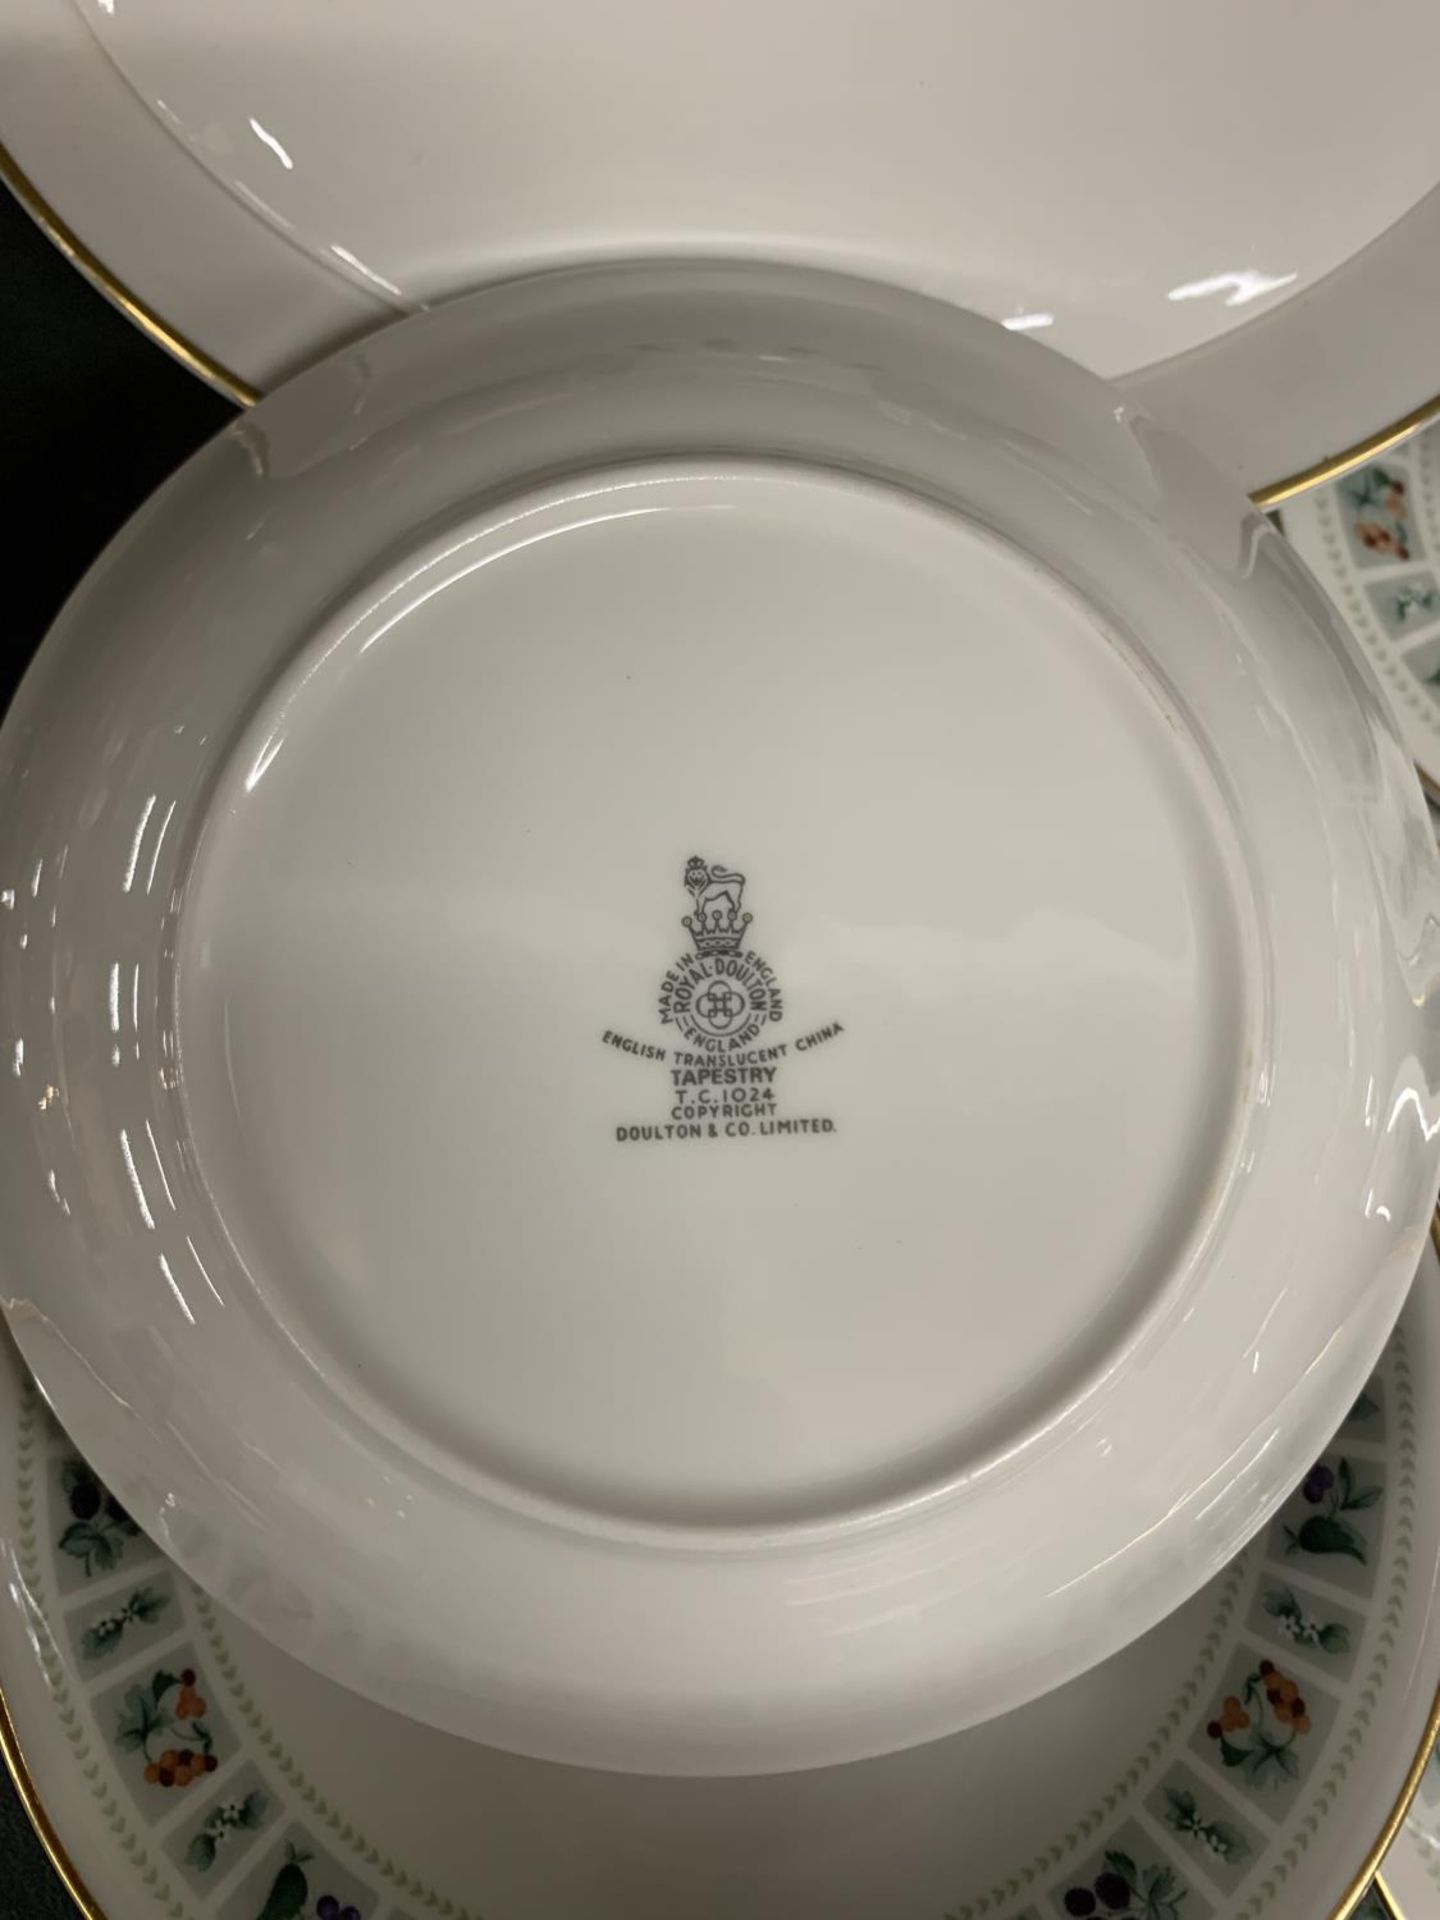 A ROYAL DOULTON 'TAPESTRY' DINNER SERVICE TO INCLUDE DINNER PLATES, SERVING TUREENS, BOWLS, CUPS, - Image 4 of 4